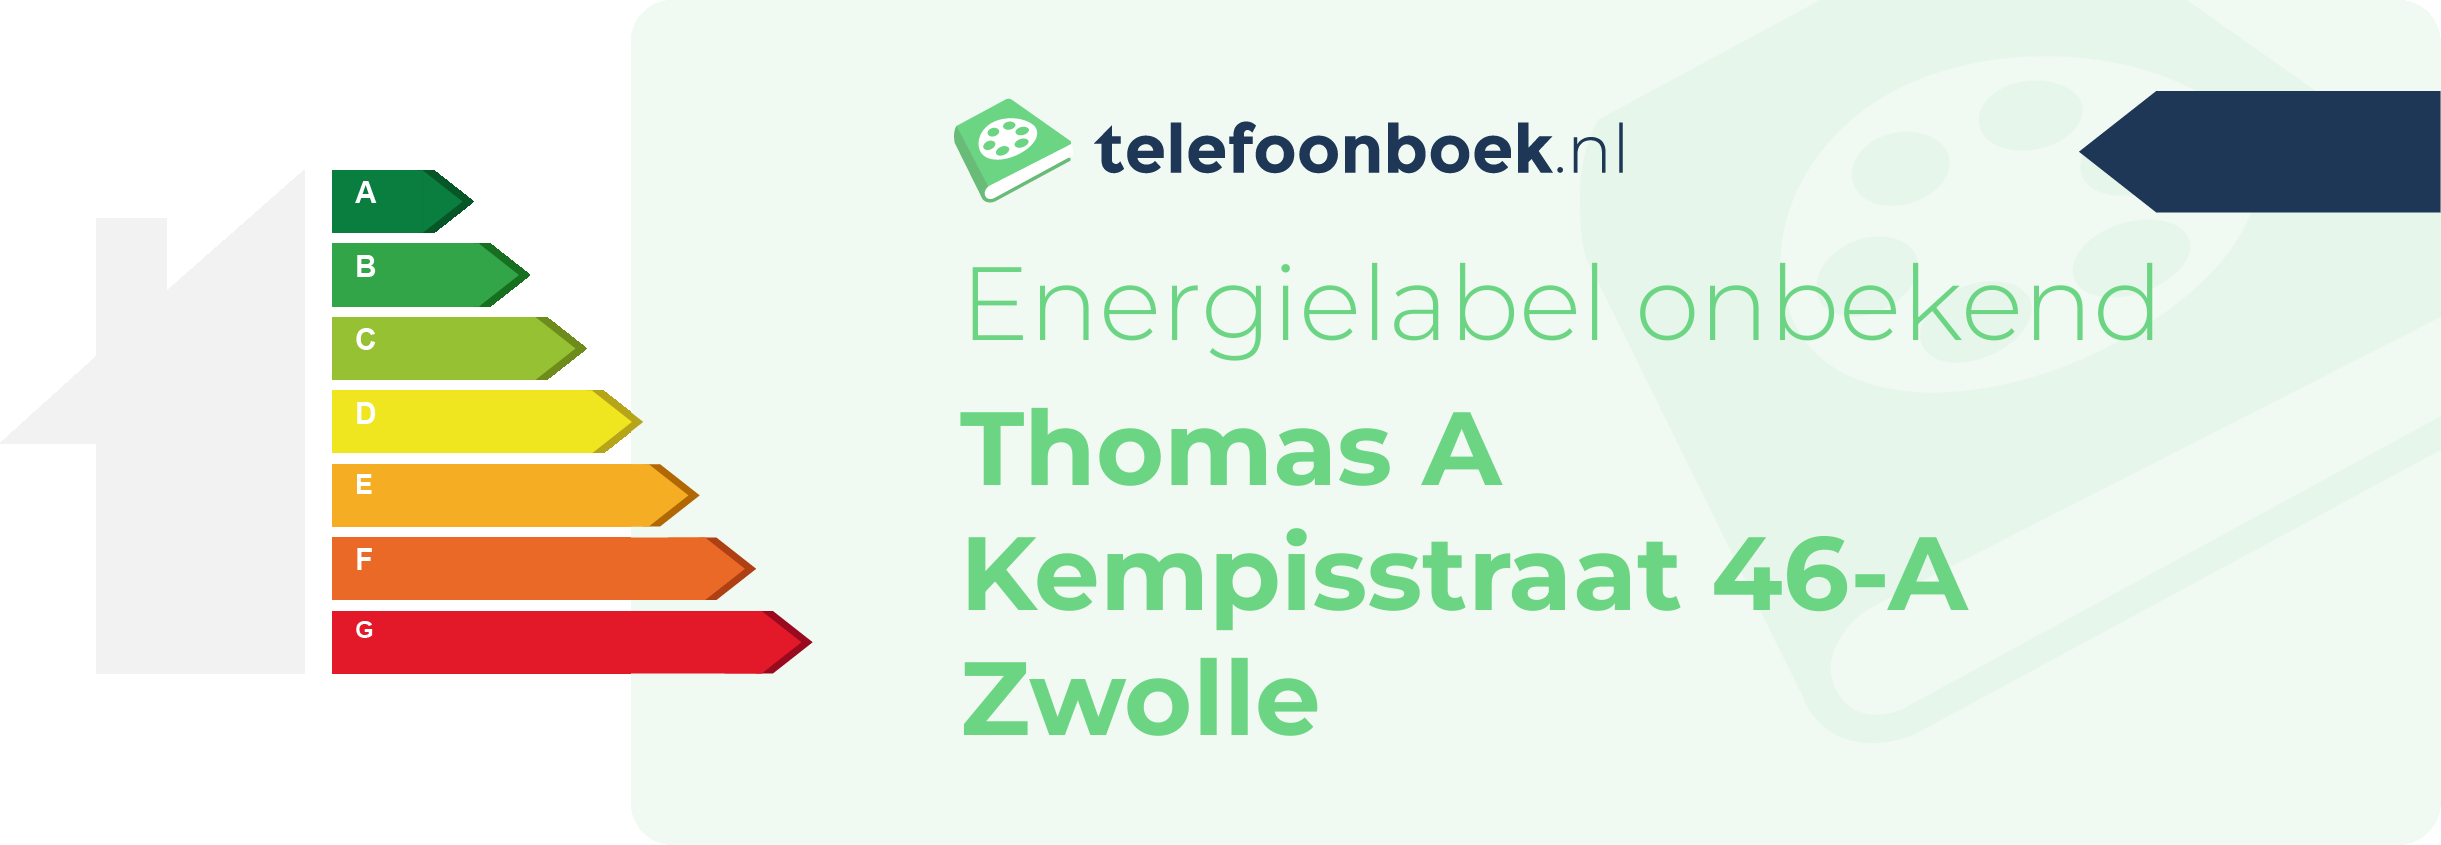 Energielabel Thomas A Kempisstraat 46-A Zwolle